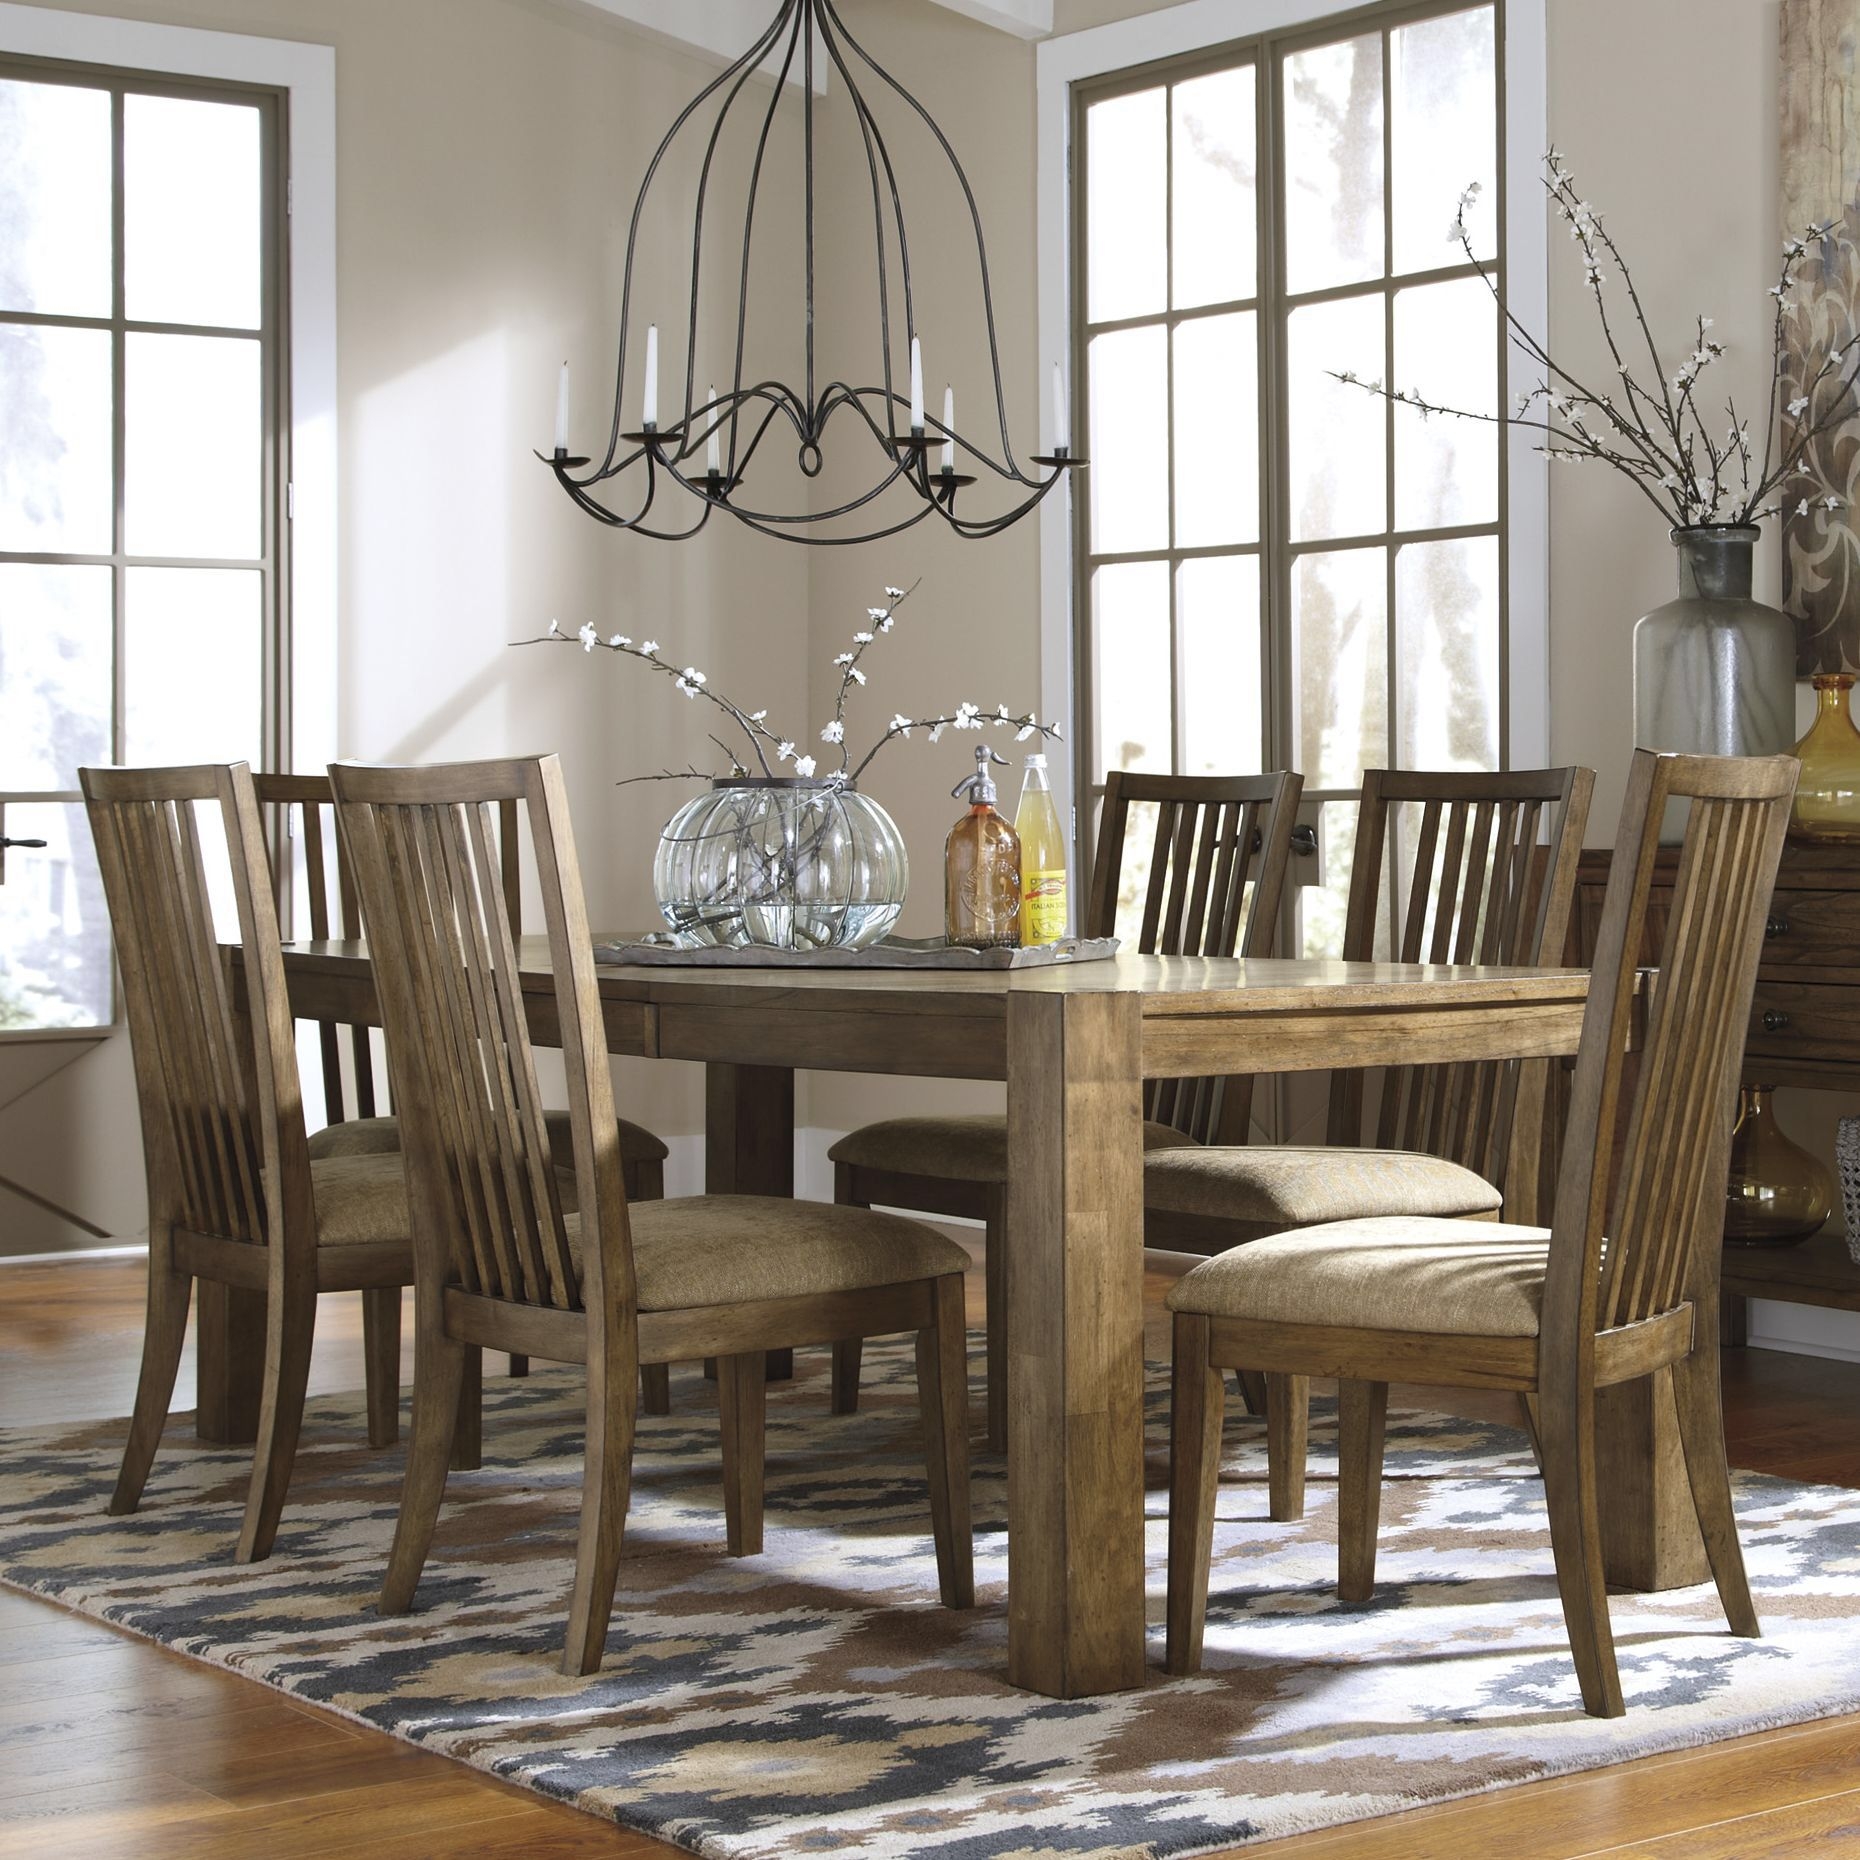 Round Dining Room Sets With Leaf - Ideas on Foter